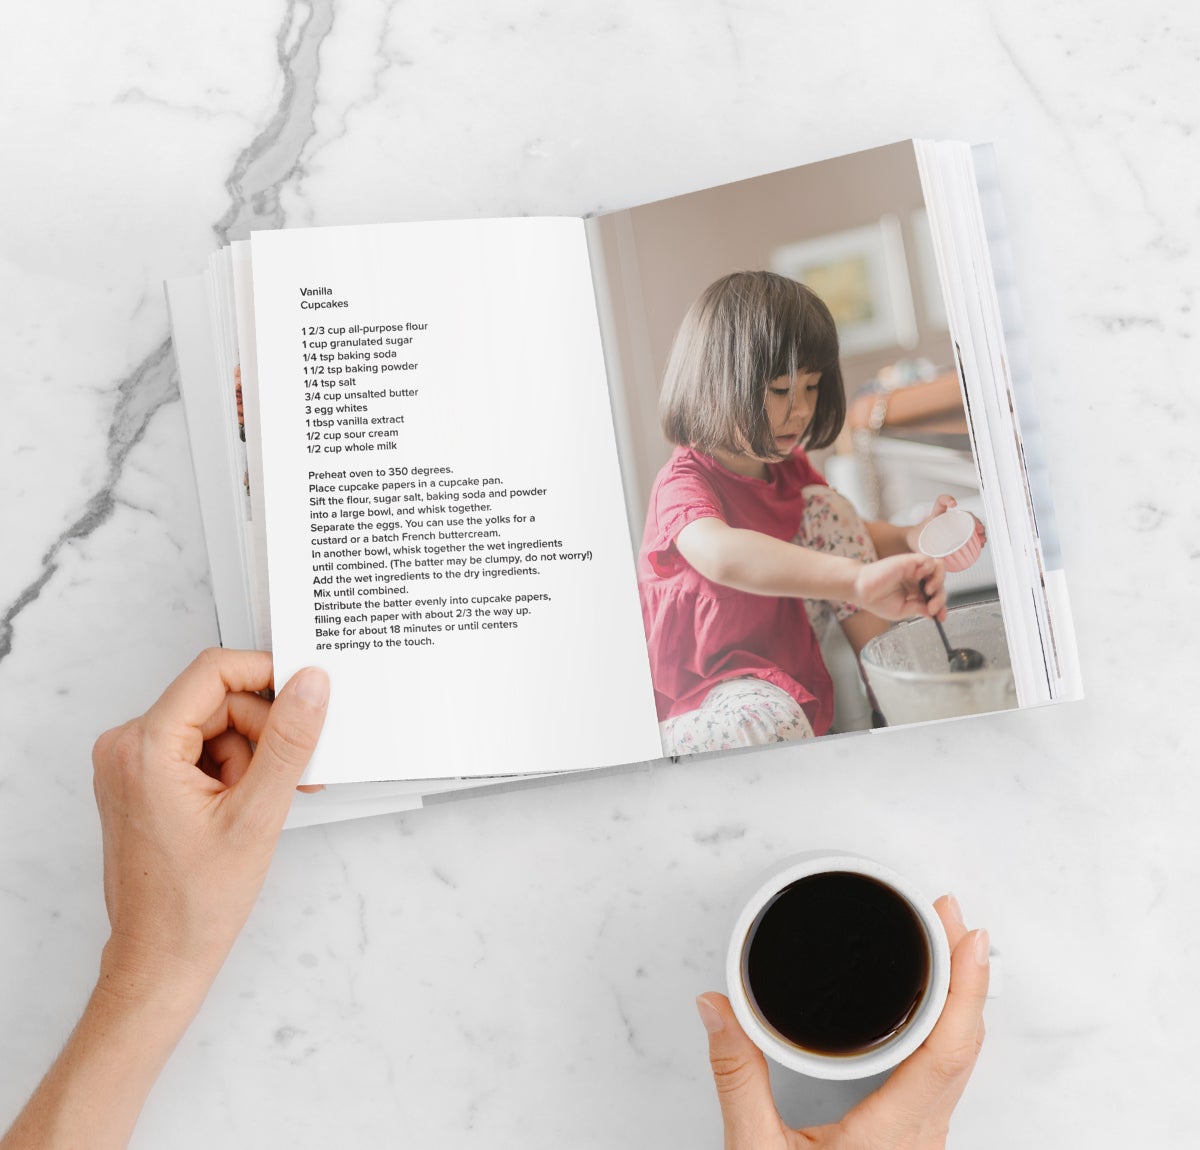 DIY recipe book opened to photo of little girl making cupcakes